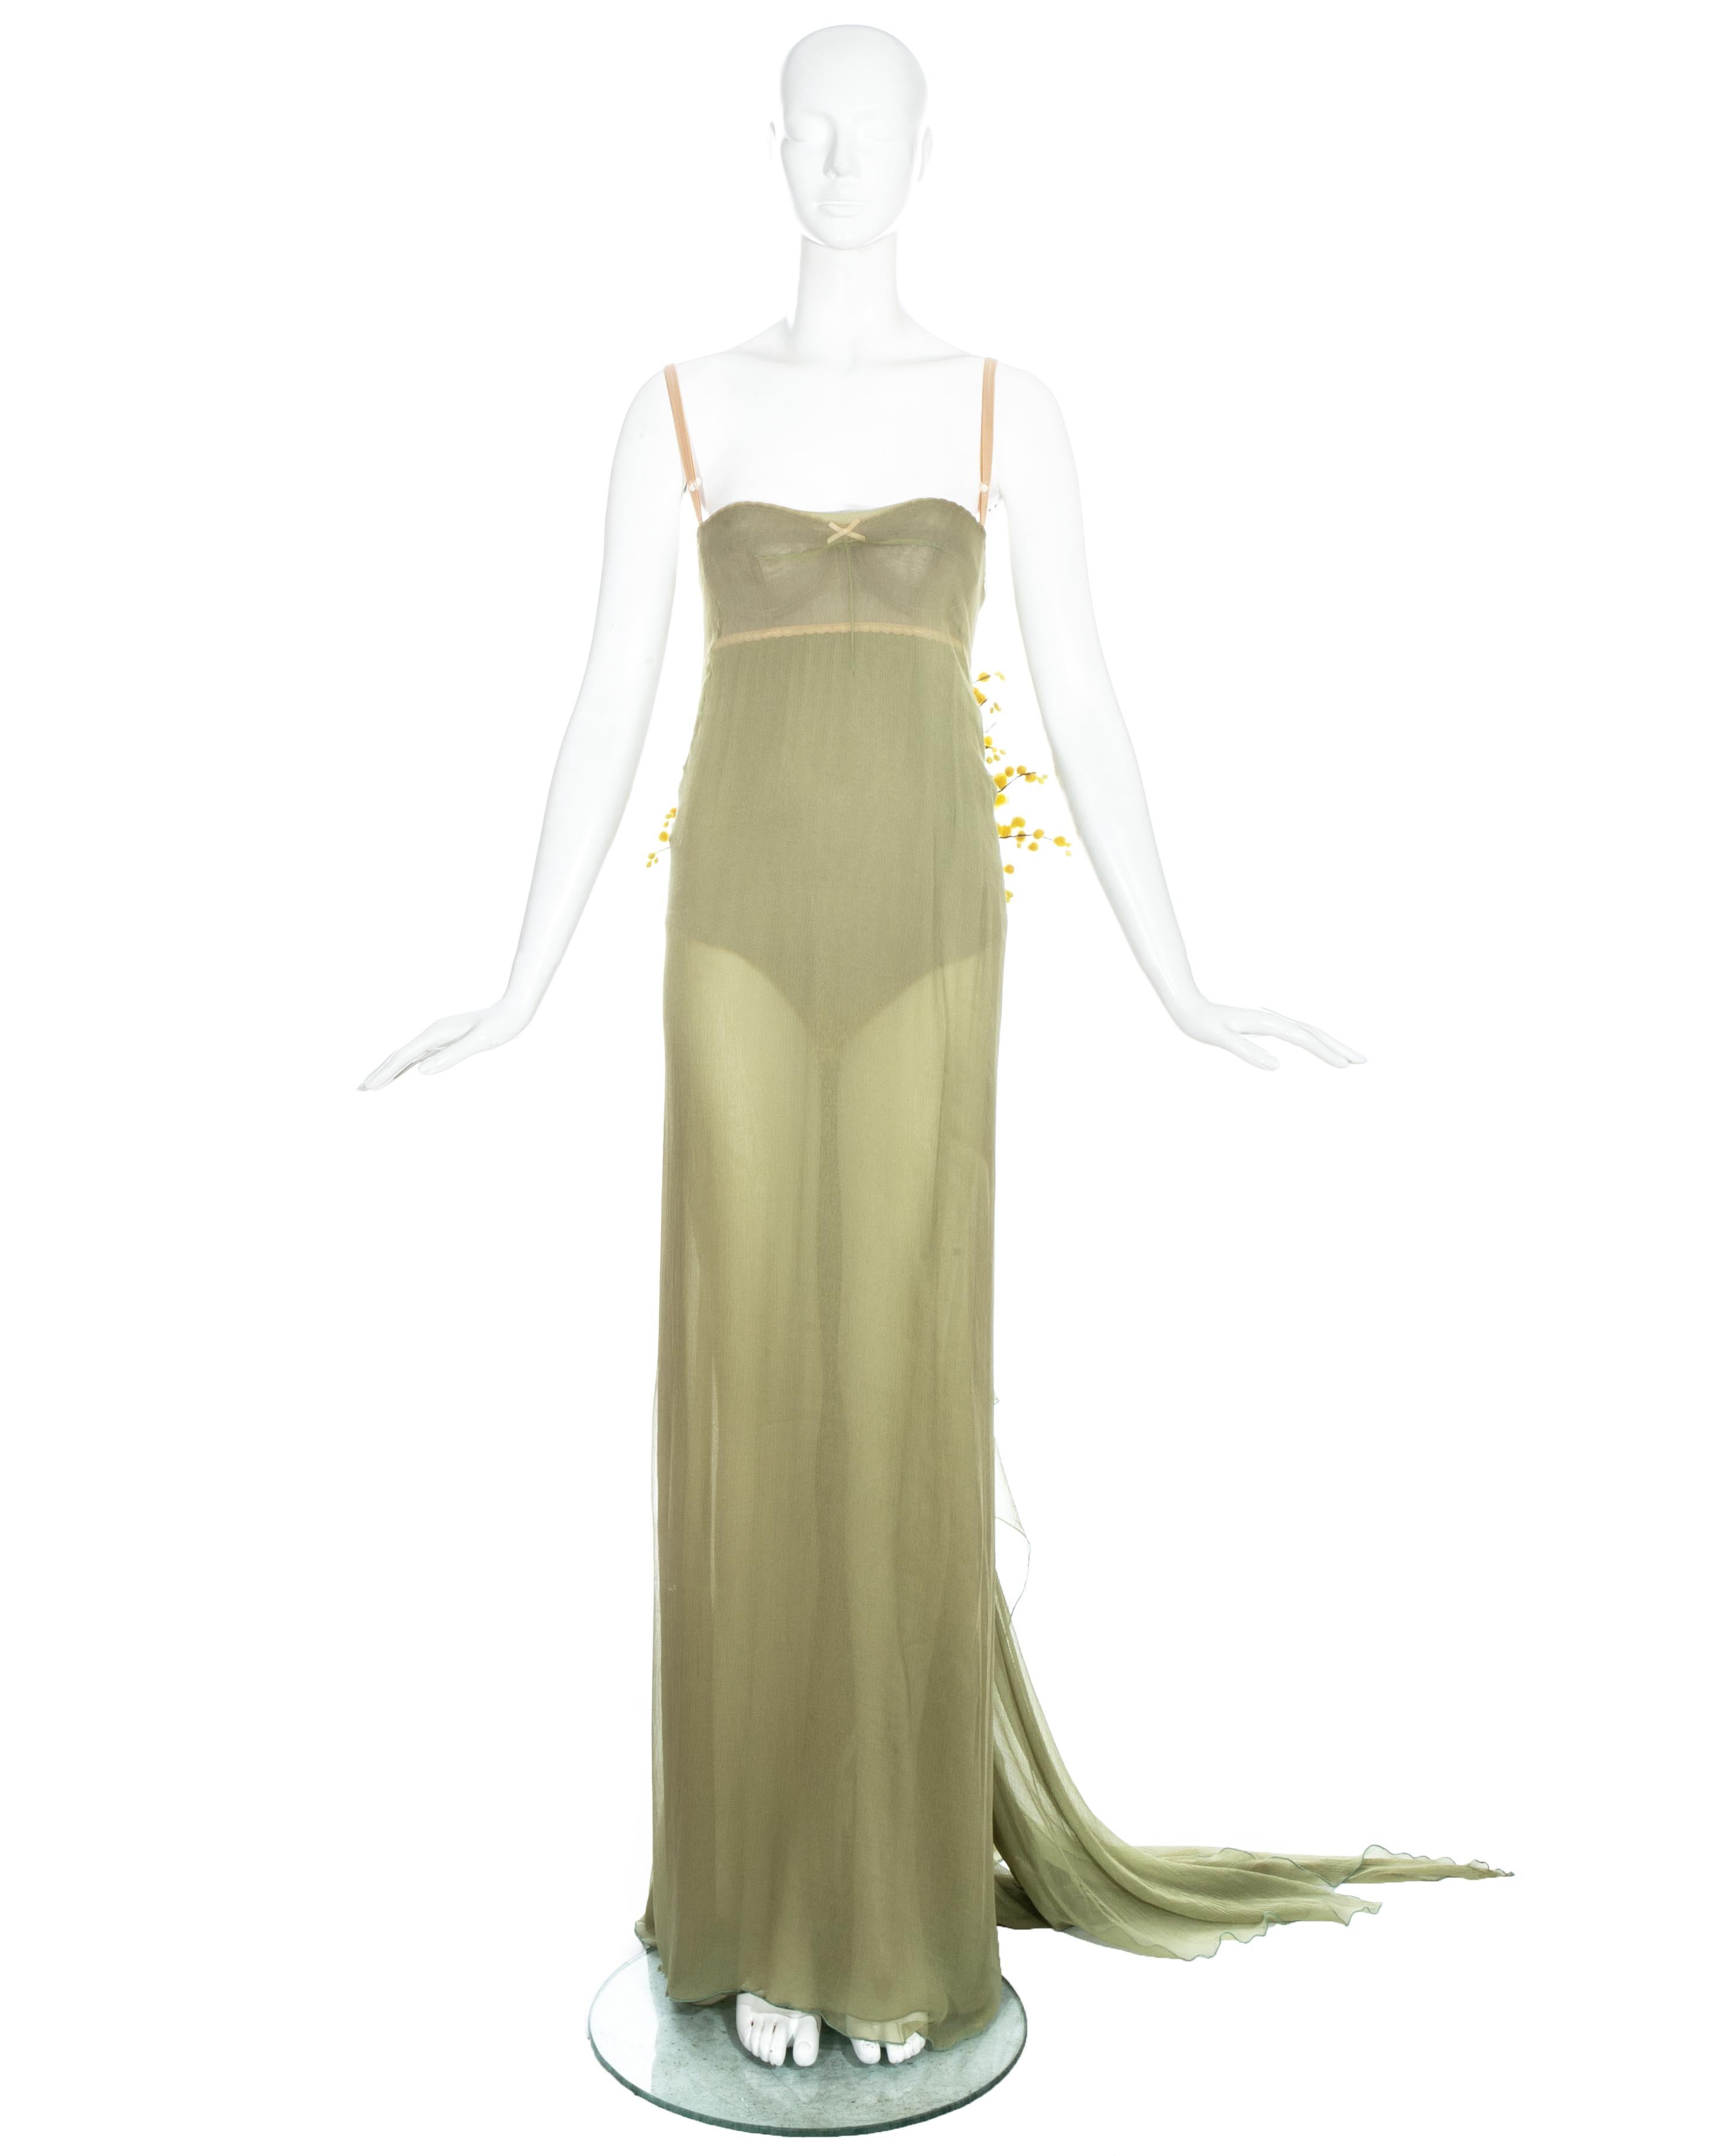 Dolce & Gabbana pistachio green silk chiffon evening dress with trained hem, built-in corseted nude bodysuit and a floral bouquet appliquéd at the rear. 

Spring-Summer 1999